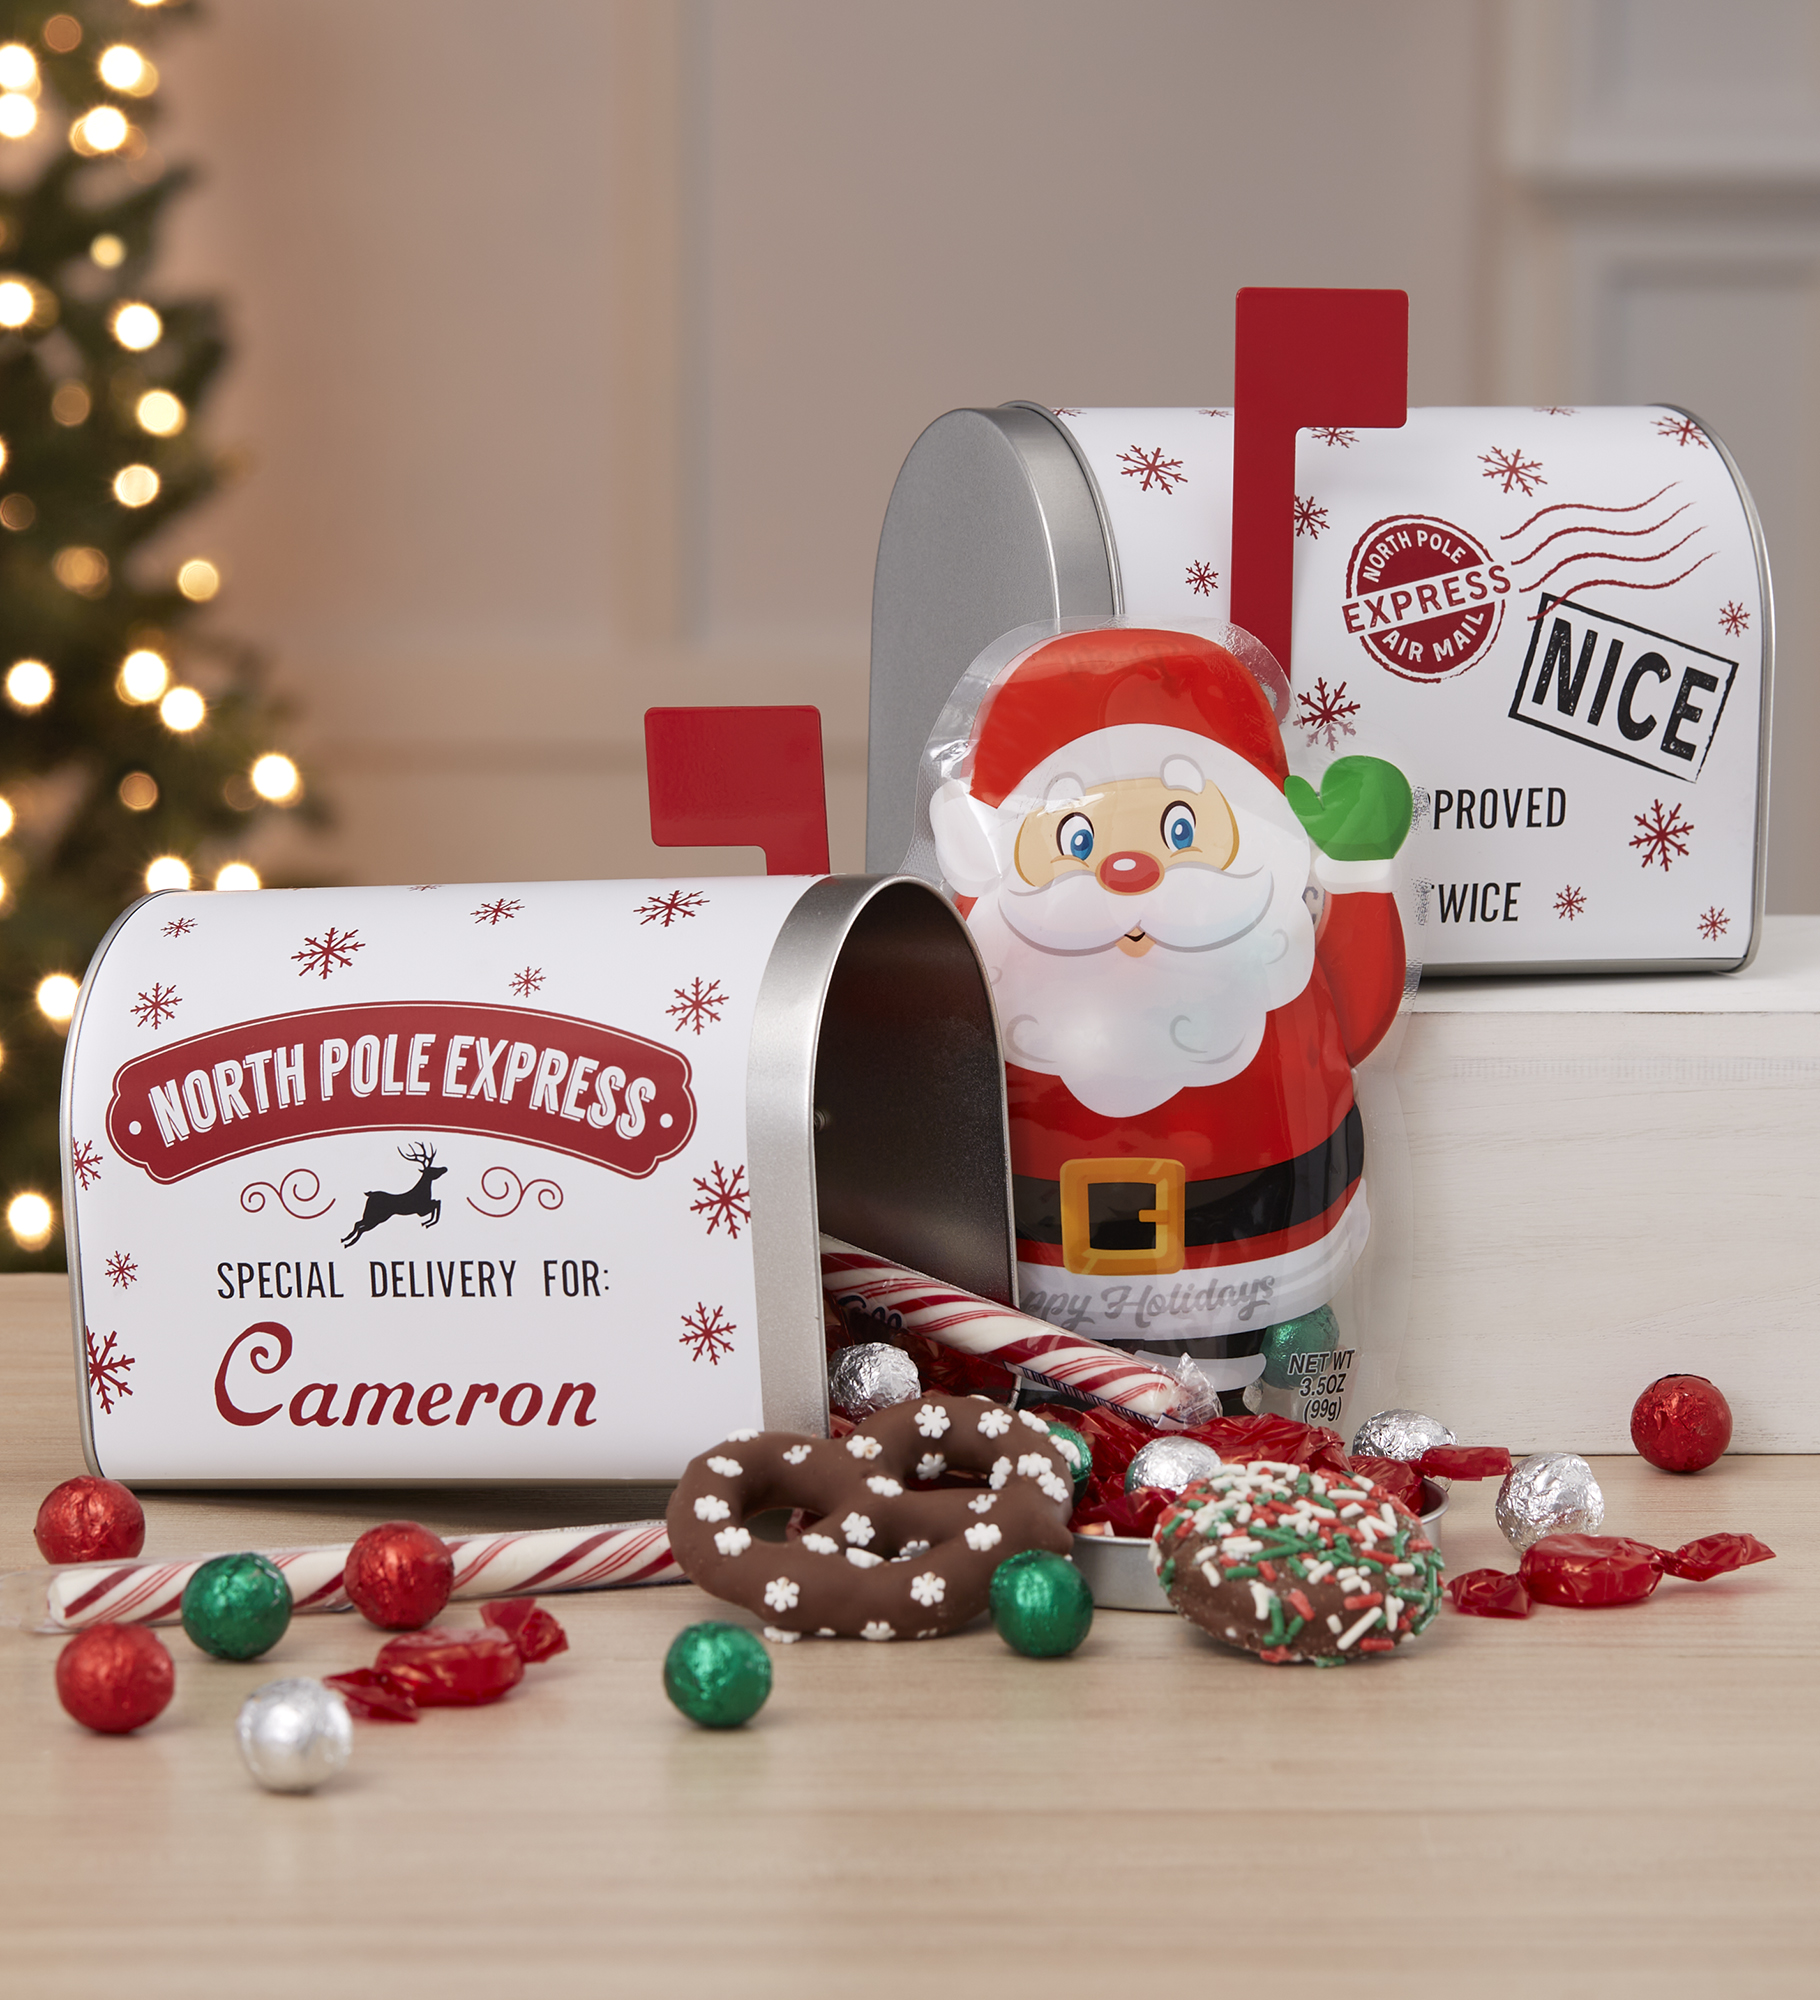 Special Delivery from Santa Personalized Christmas Mailbox & Treat Gift Set